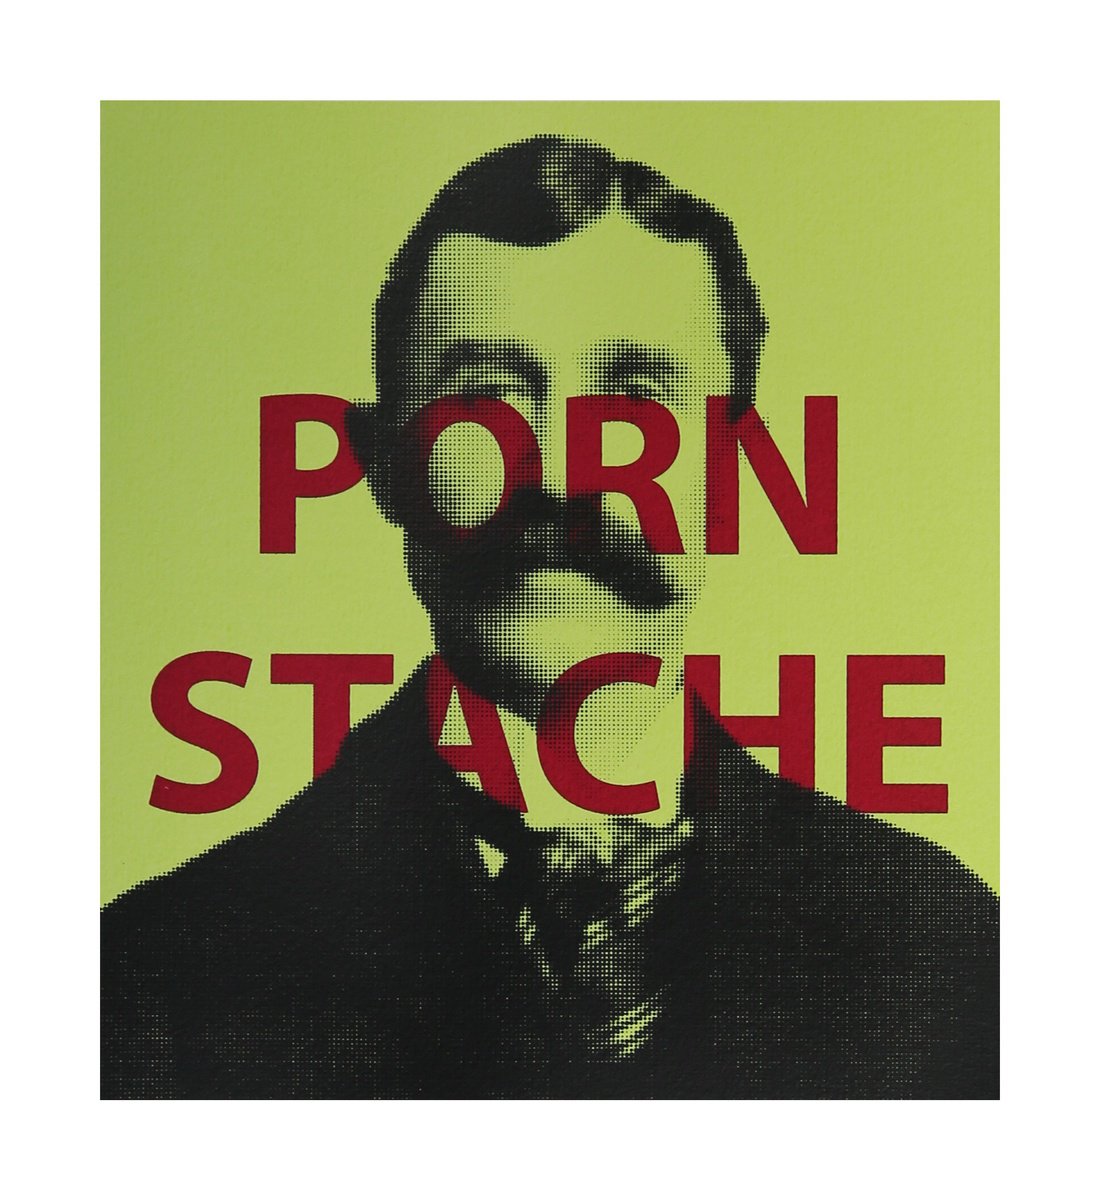 PORN STACHE (Lime Green & Rubine Red) by AAWatson